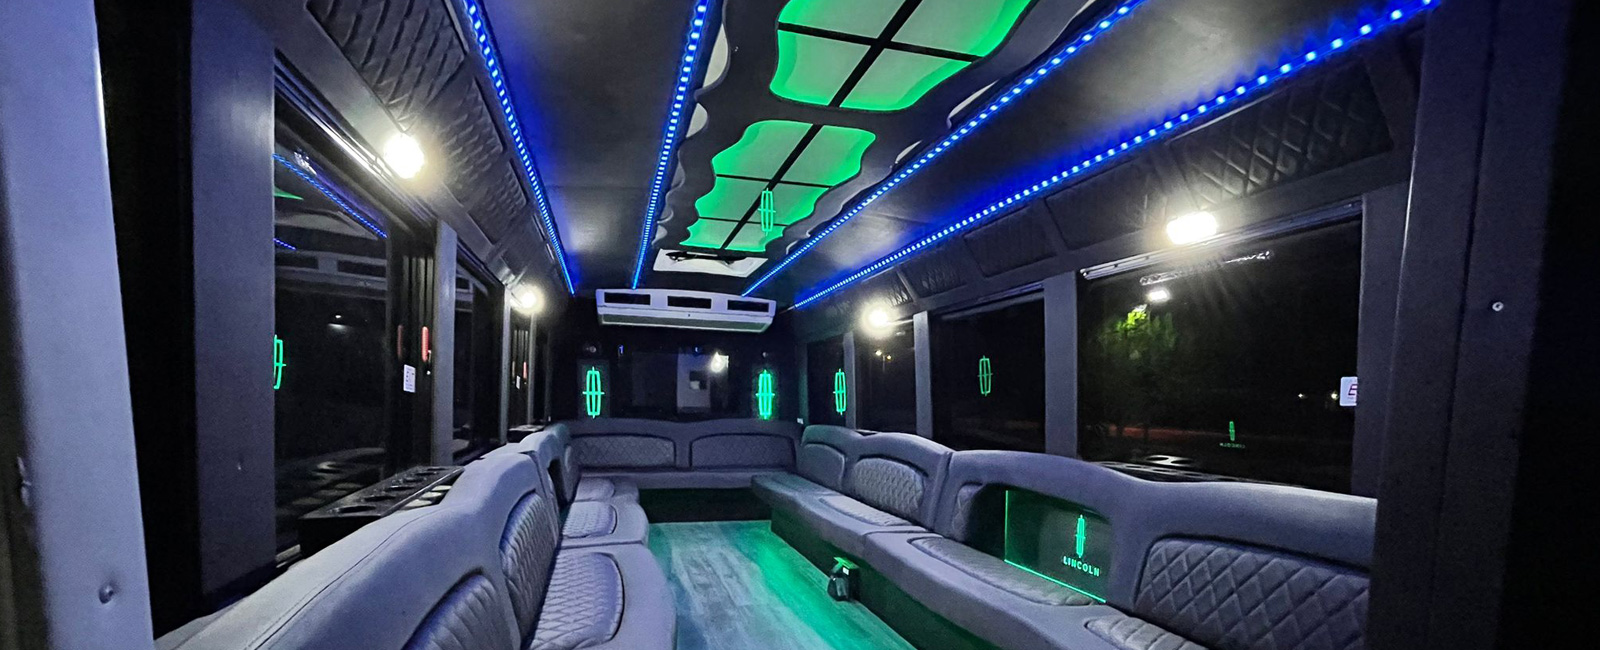 Lighted Bus Ceiling Panels